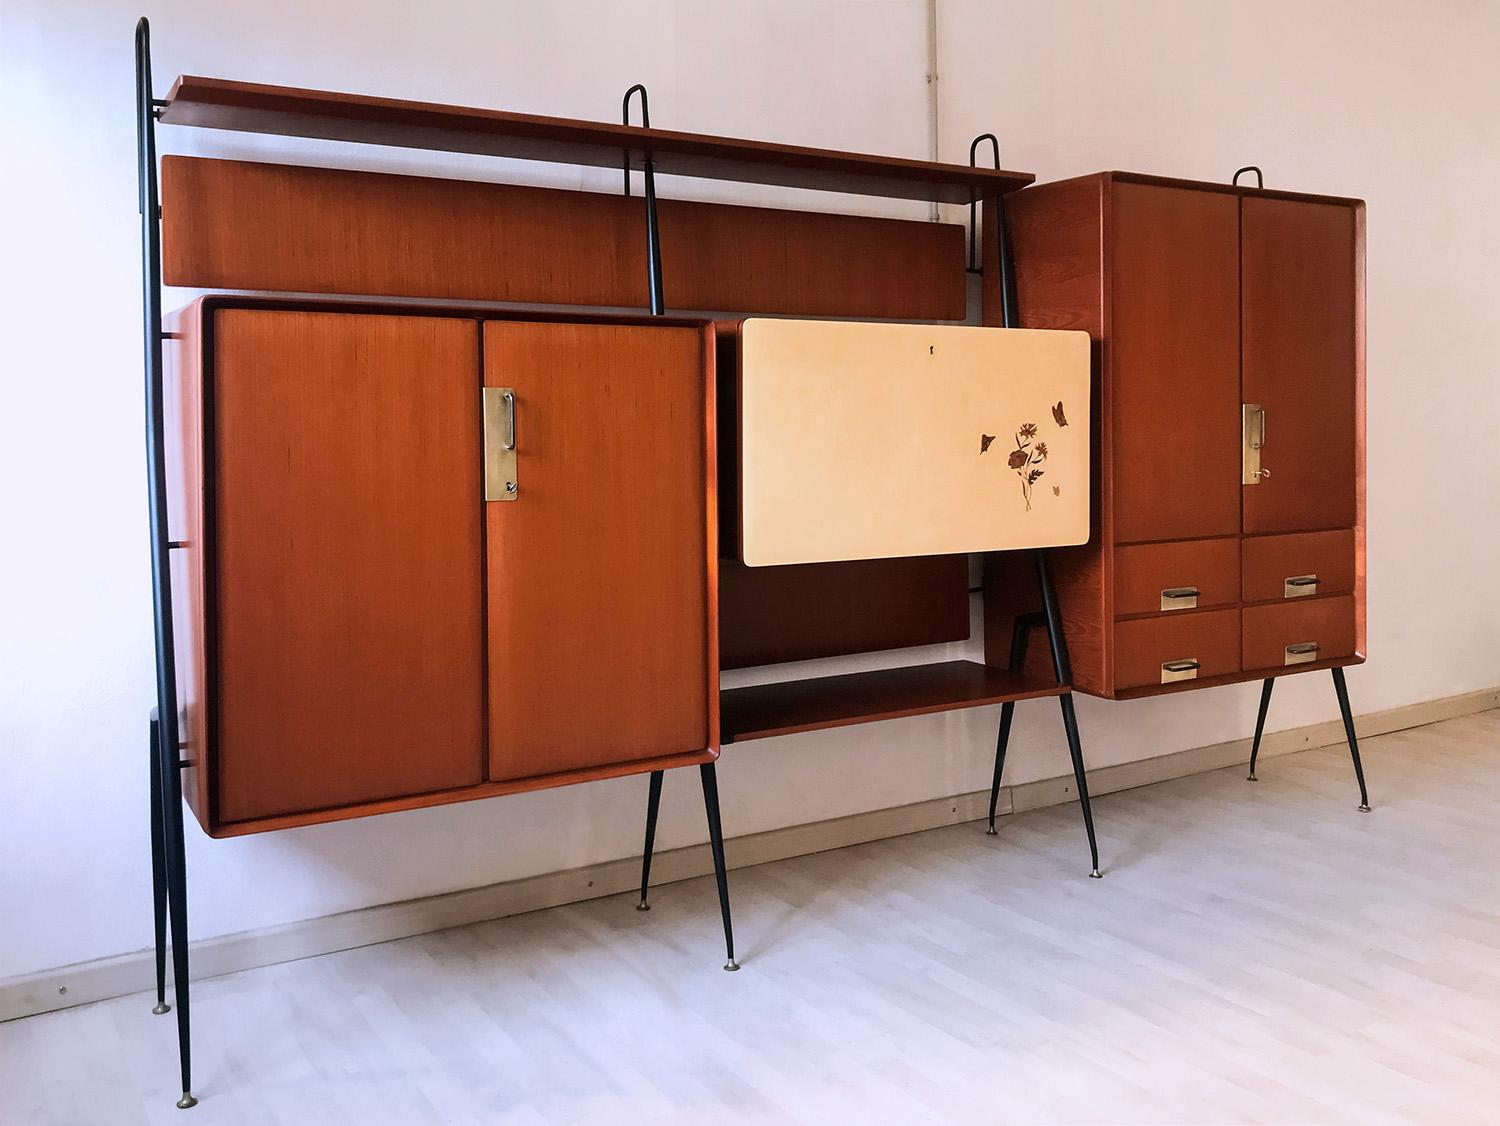 Stunning Italian living room teakwood Highboard designed and manufactured by Silvio Cavatorta in the 1950s.
The whole structure is supported by four black painted metal uprights and the two side cabinets are equipped with hinged doors and handles